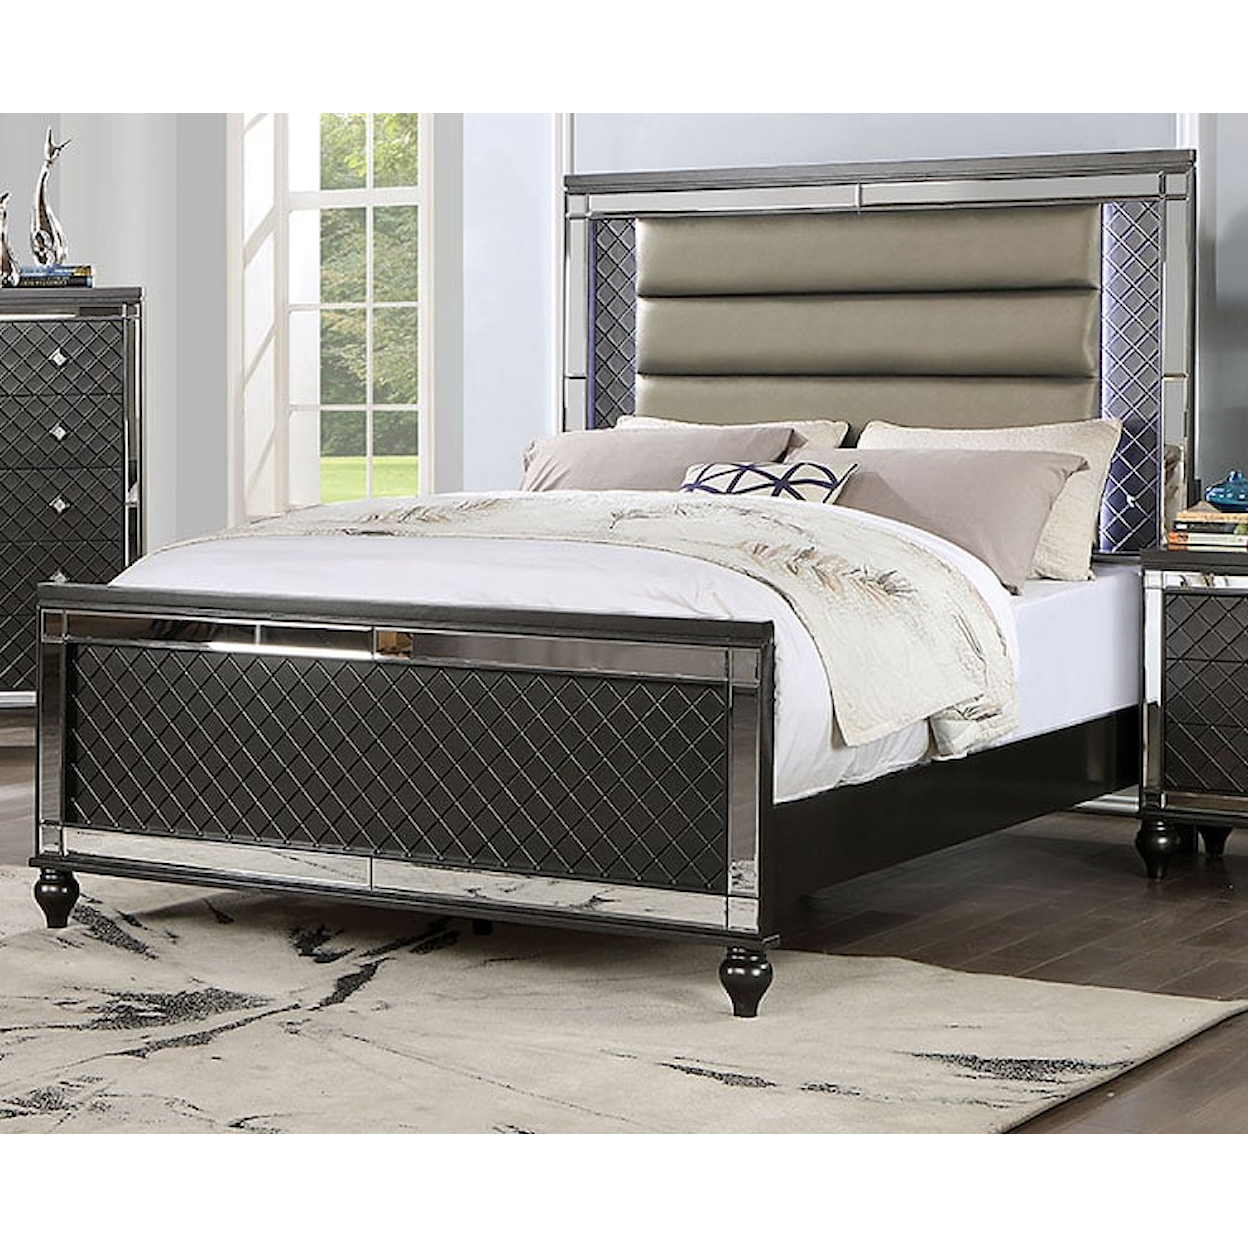 Furniture of America CALANDRIA California King Bed with Built-In Lighting